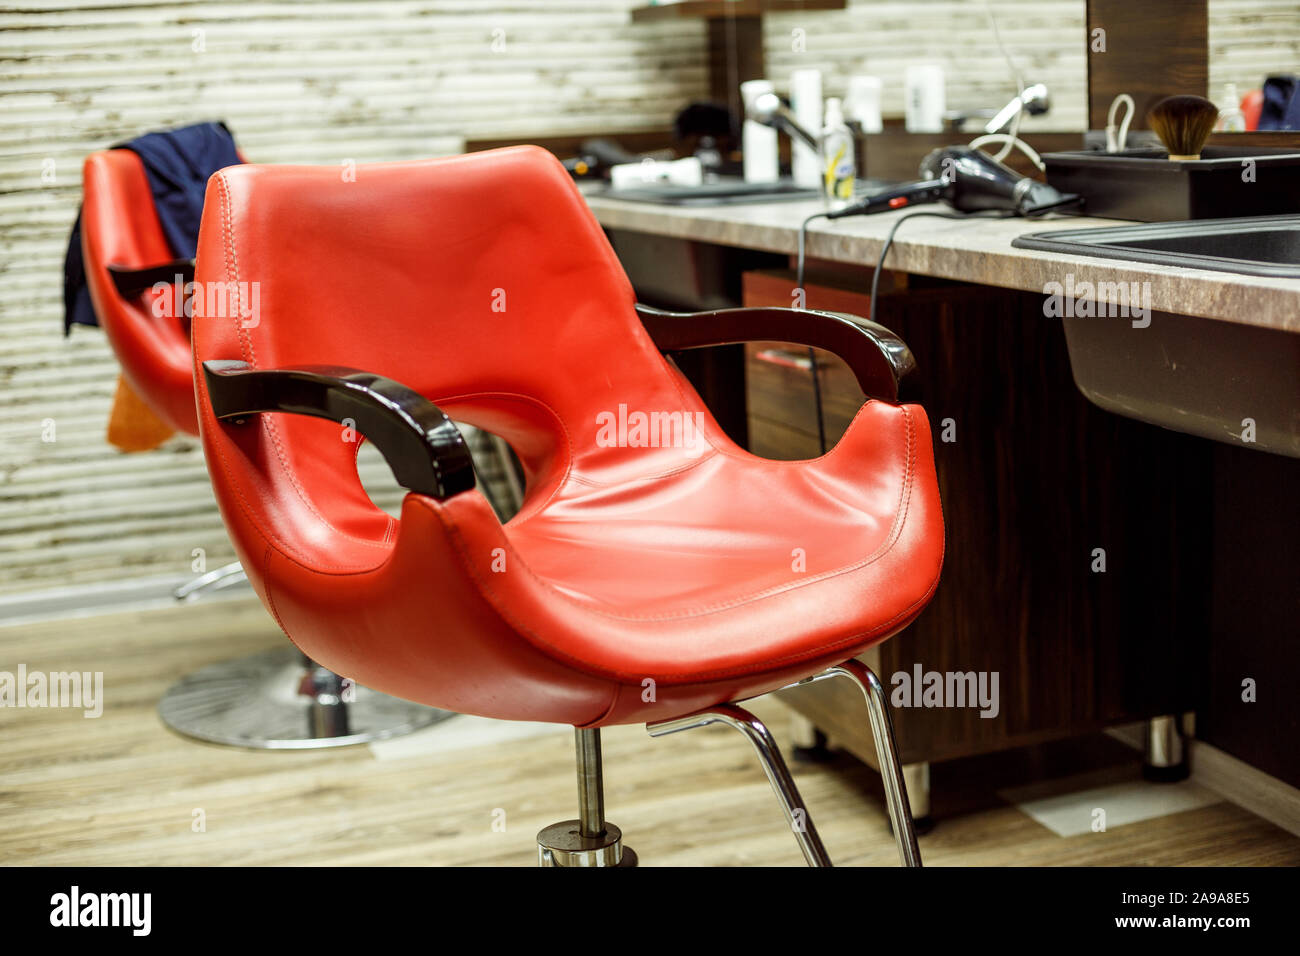 Red Chair With A Metal Base In The Barber Shop Small Depth Of